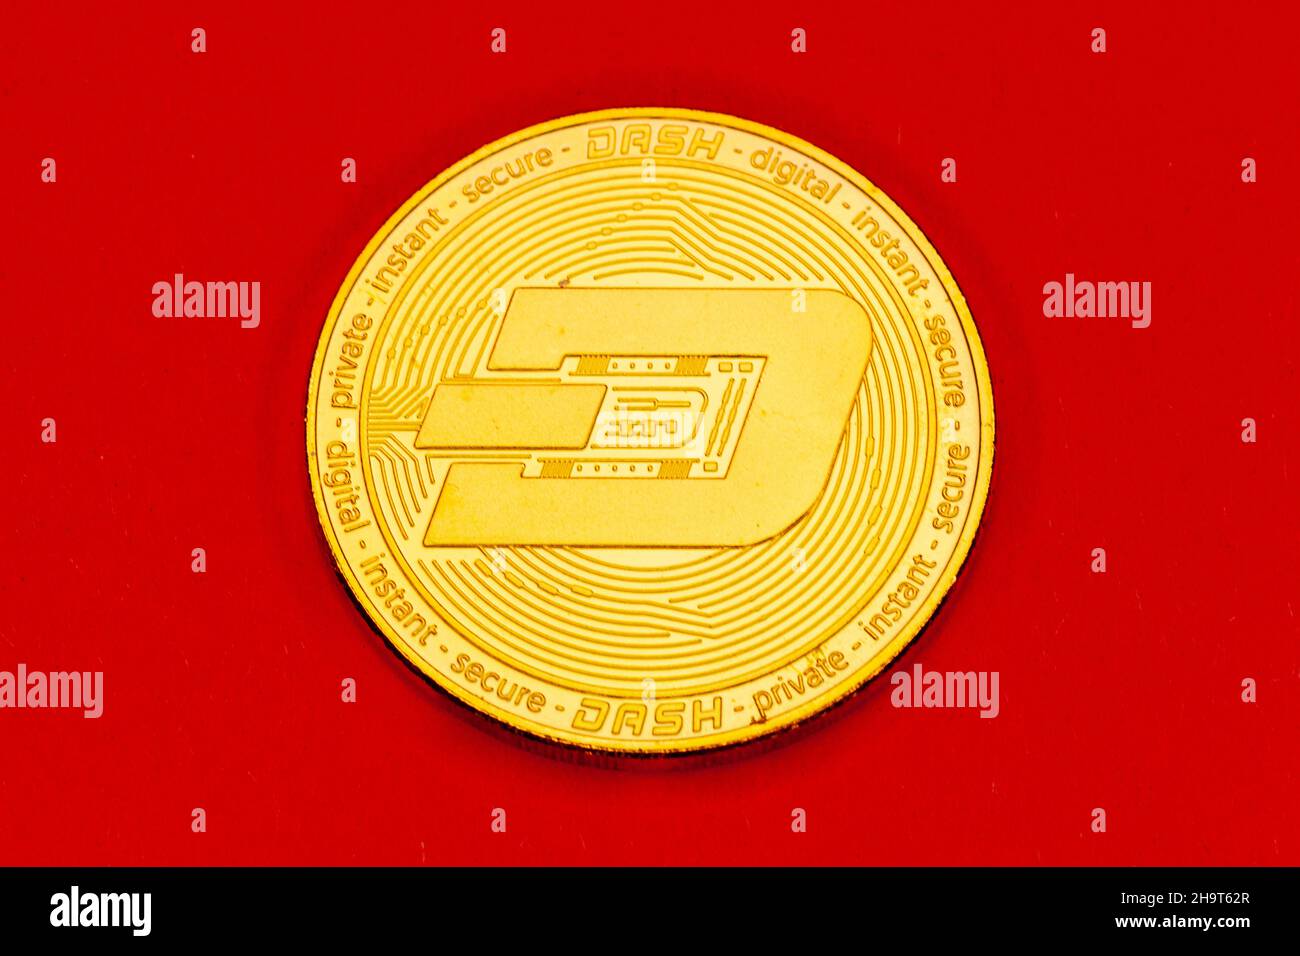 Dash physical cryptocurrencey coin. Stock Photo